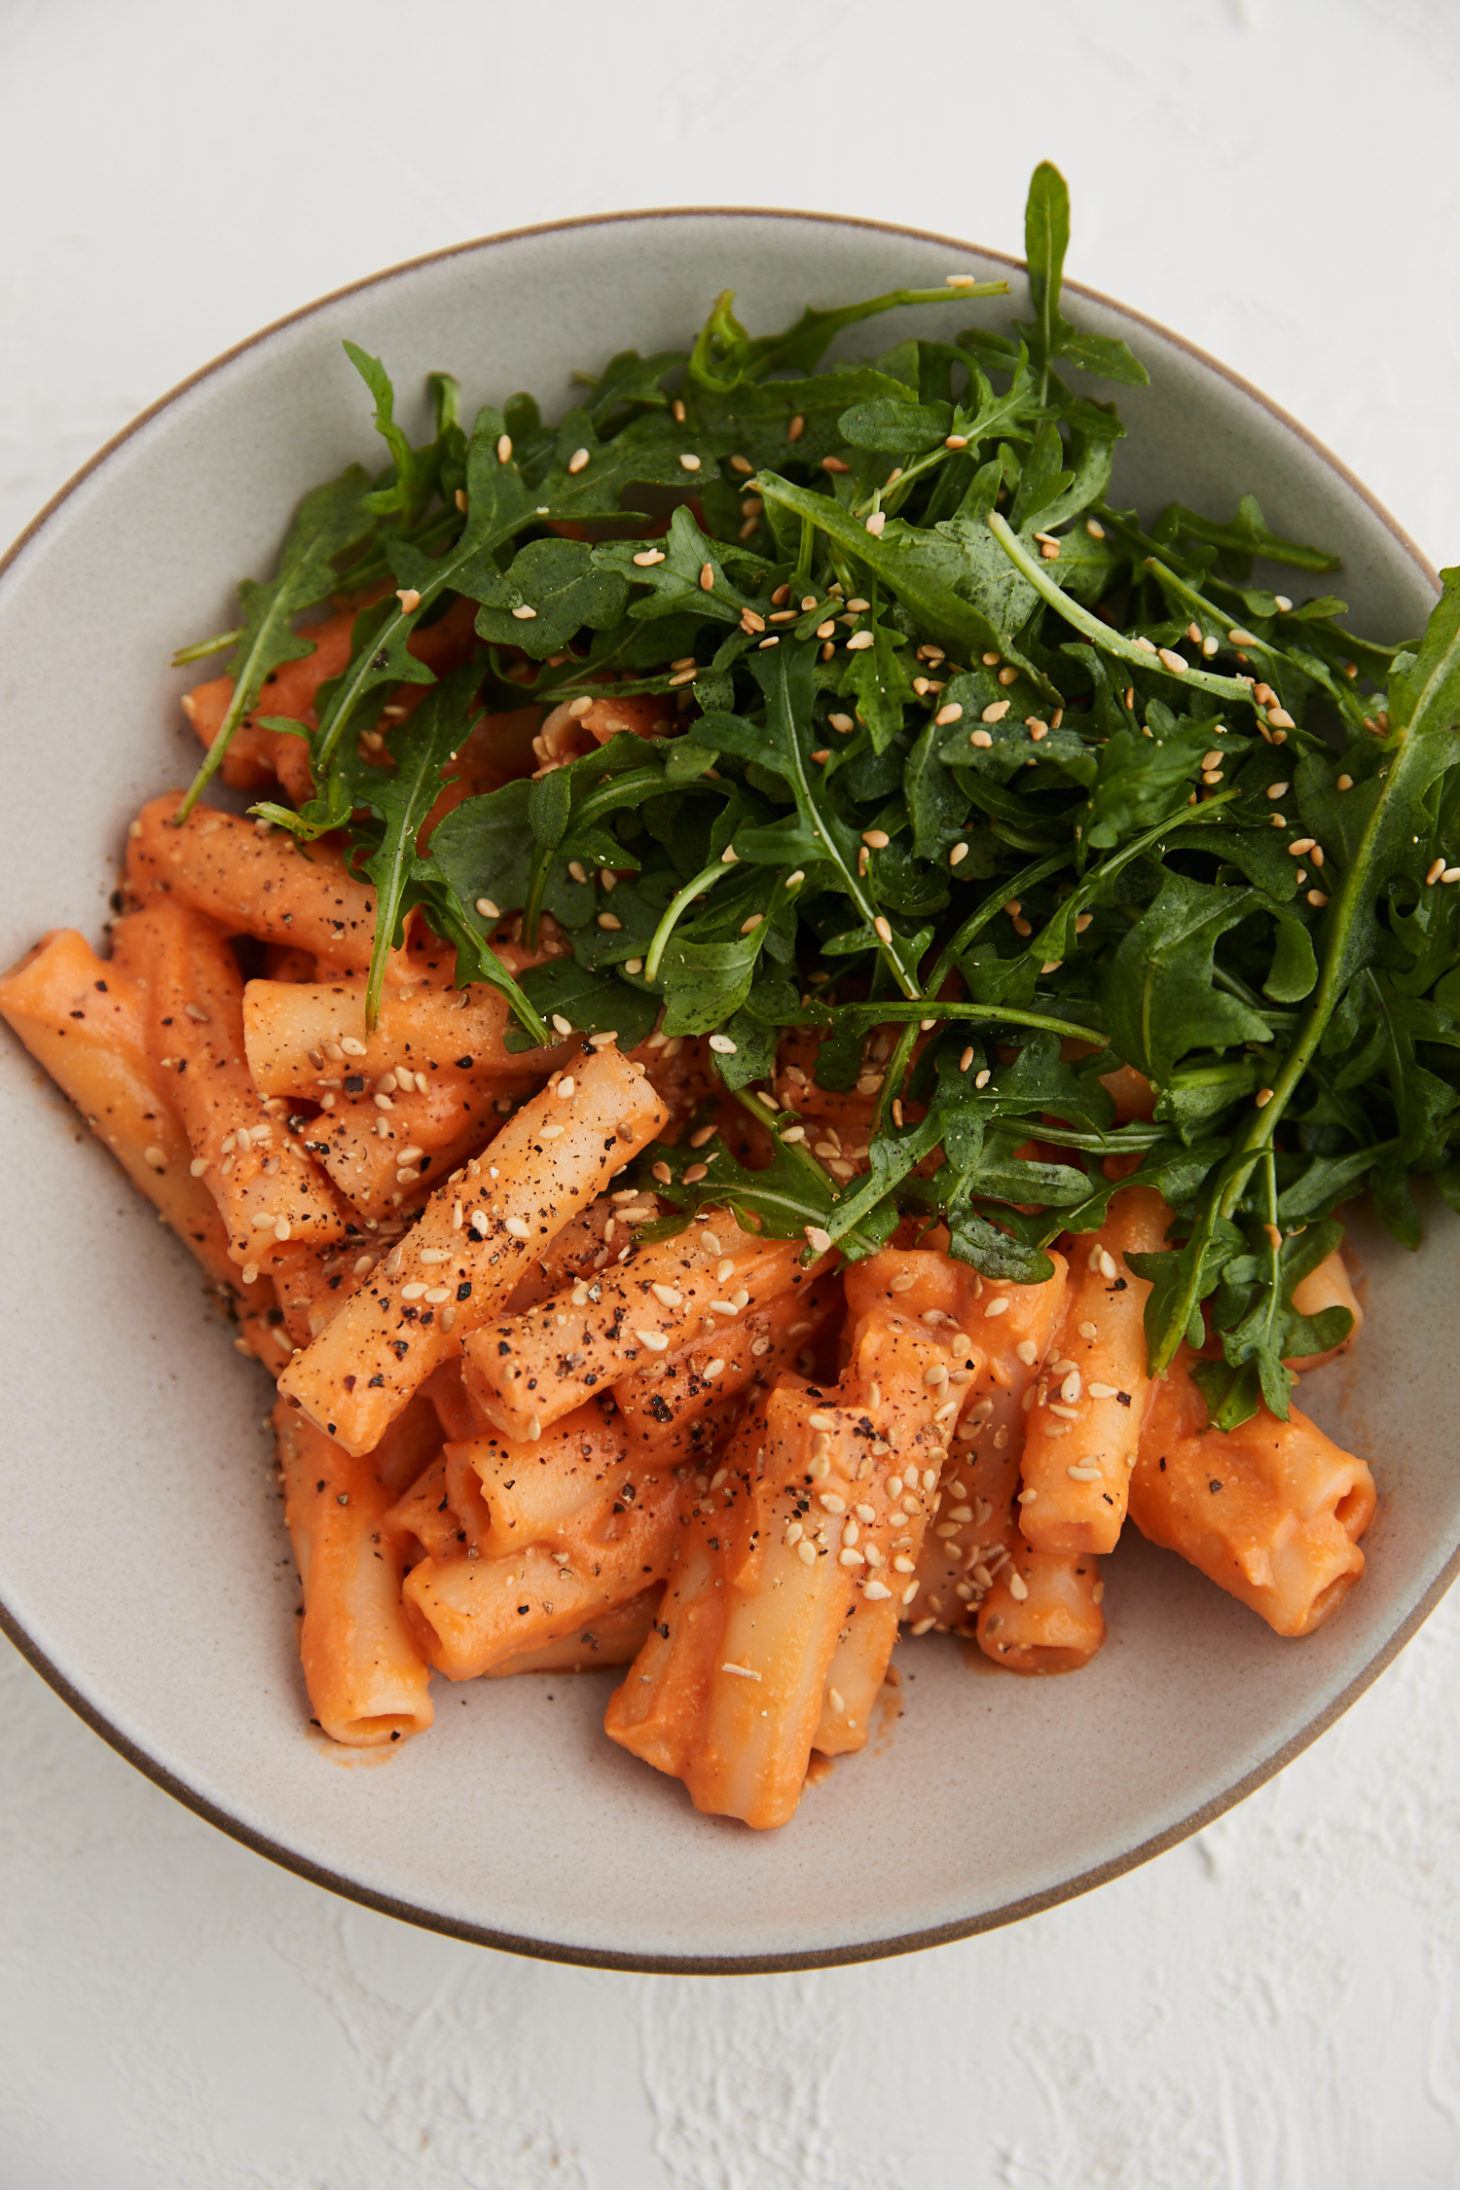 Close-up image of pasta topped in a carrot sauce and arugula.